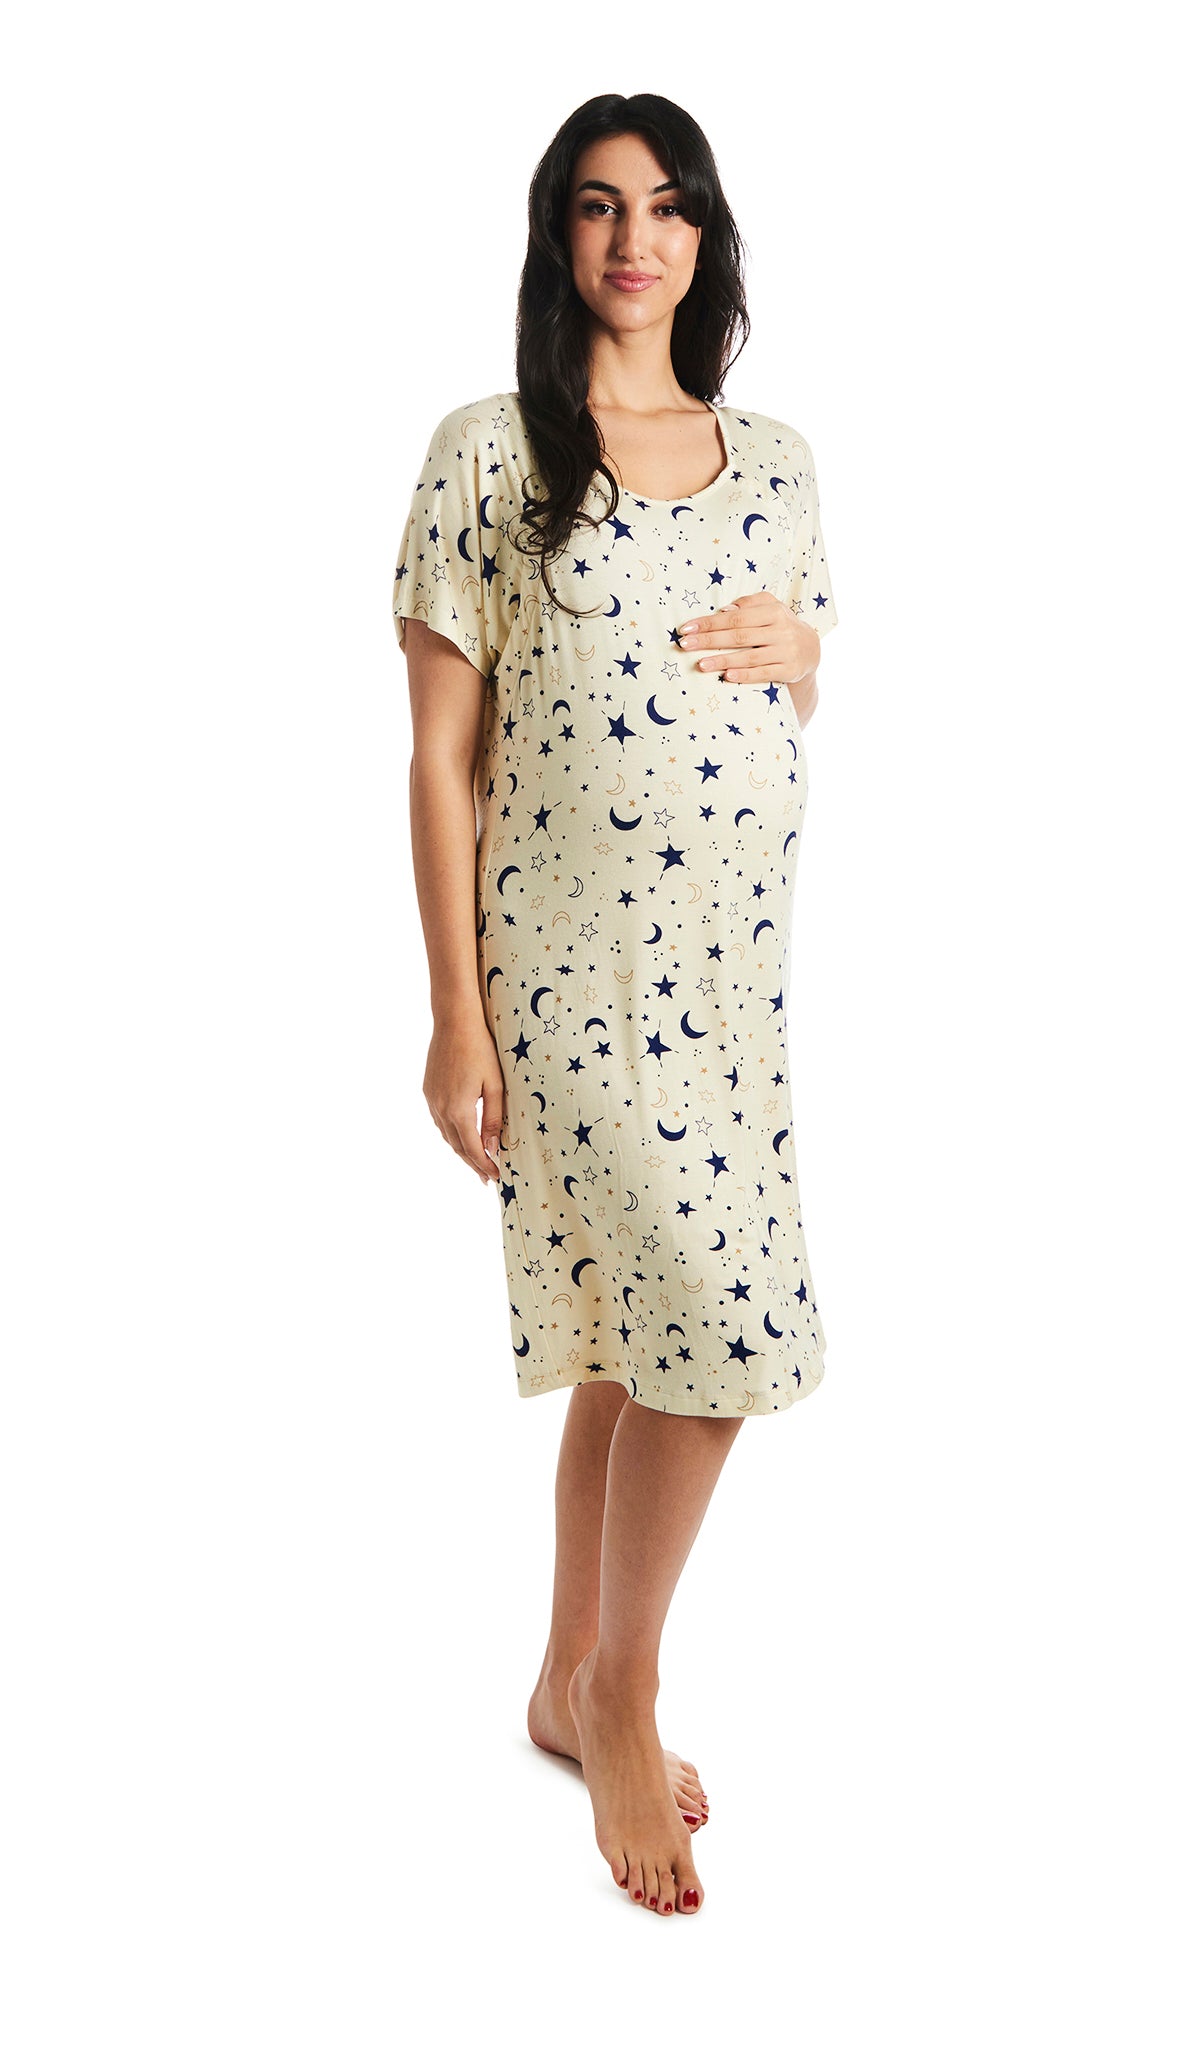 Twinkle Rosa hospital gown. Pregnant woman with one hand on belly, wearing hospital gown with scoop-neckline featuring dual snap openings. 